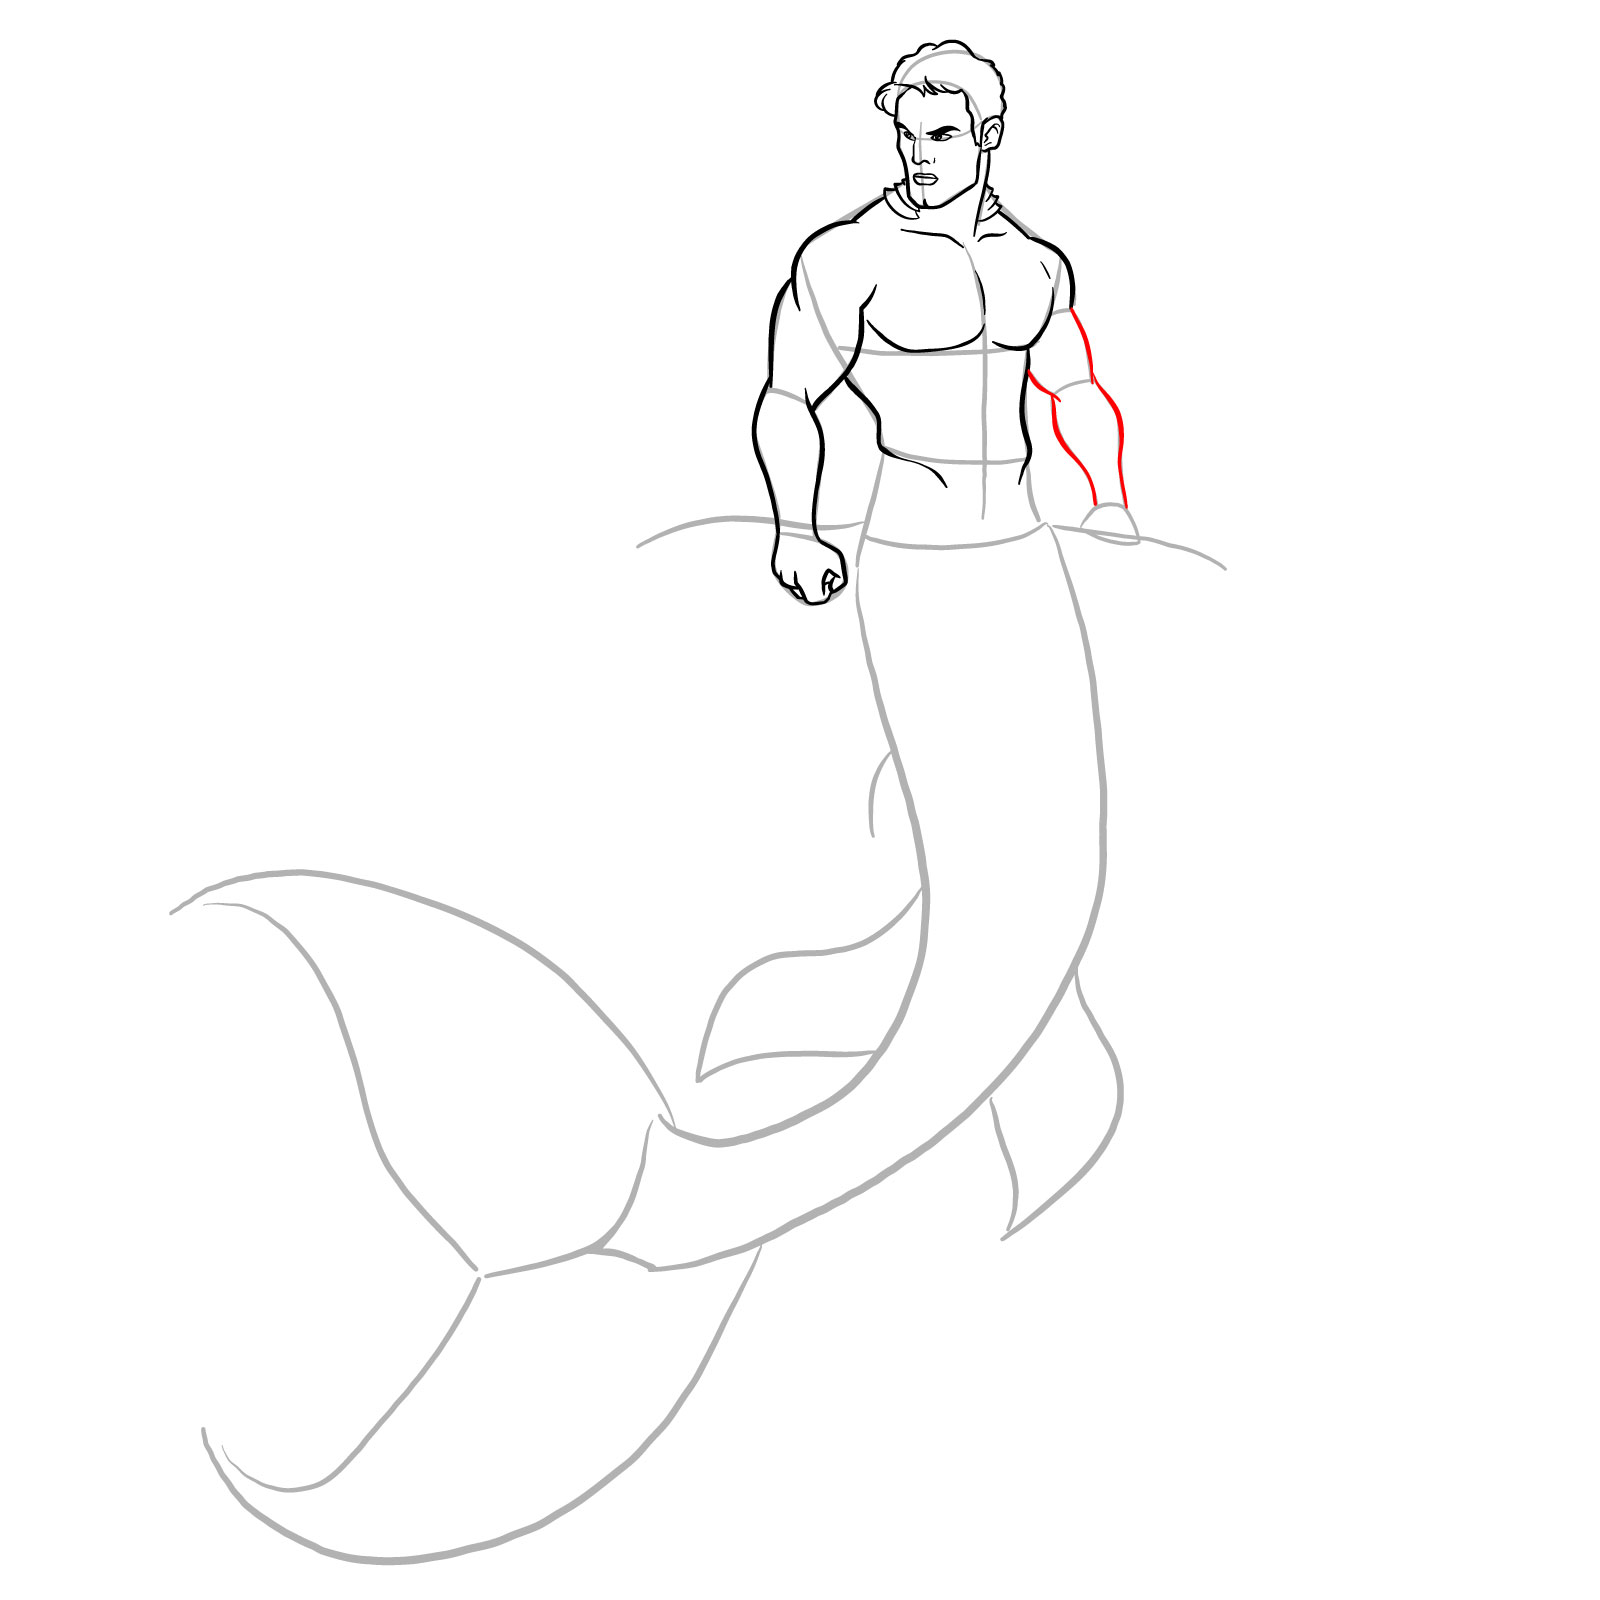 How to draw a Merman - step 19